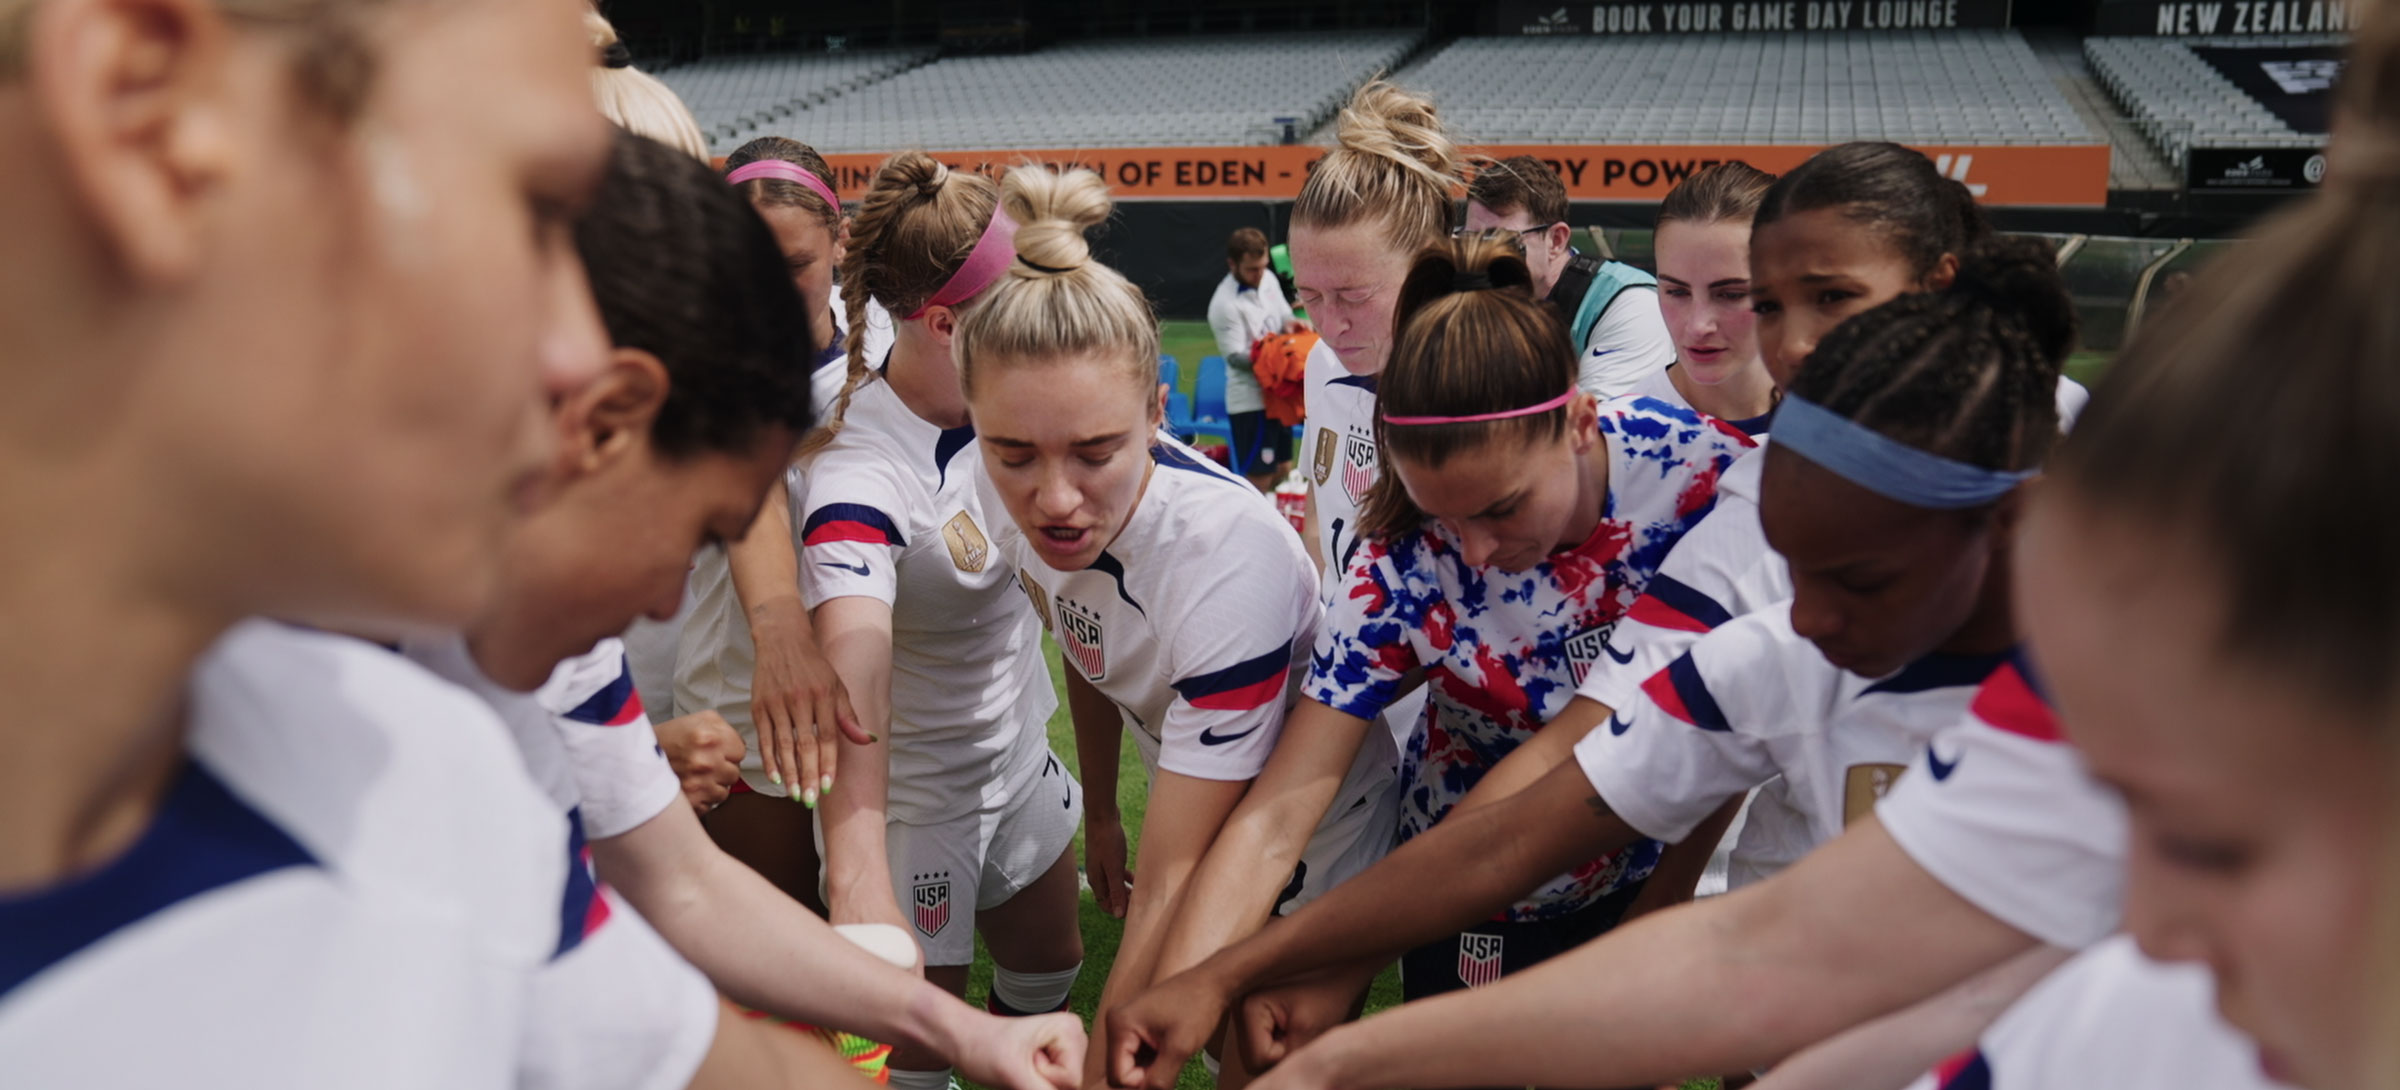 Members of the 2023 FIFA Women's World Cup U.S. Team in Netflix’s Under Pressure: The U.S. Women's World Cup Team. Cr. Courtesy of Netflix © 2023